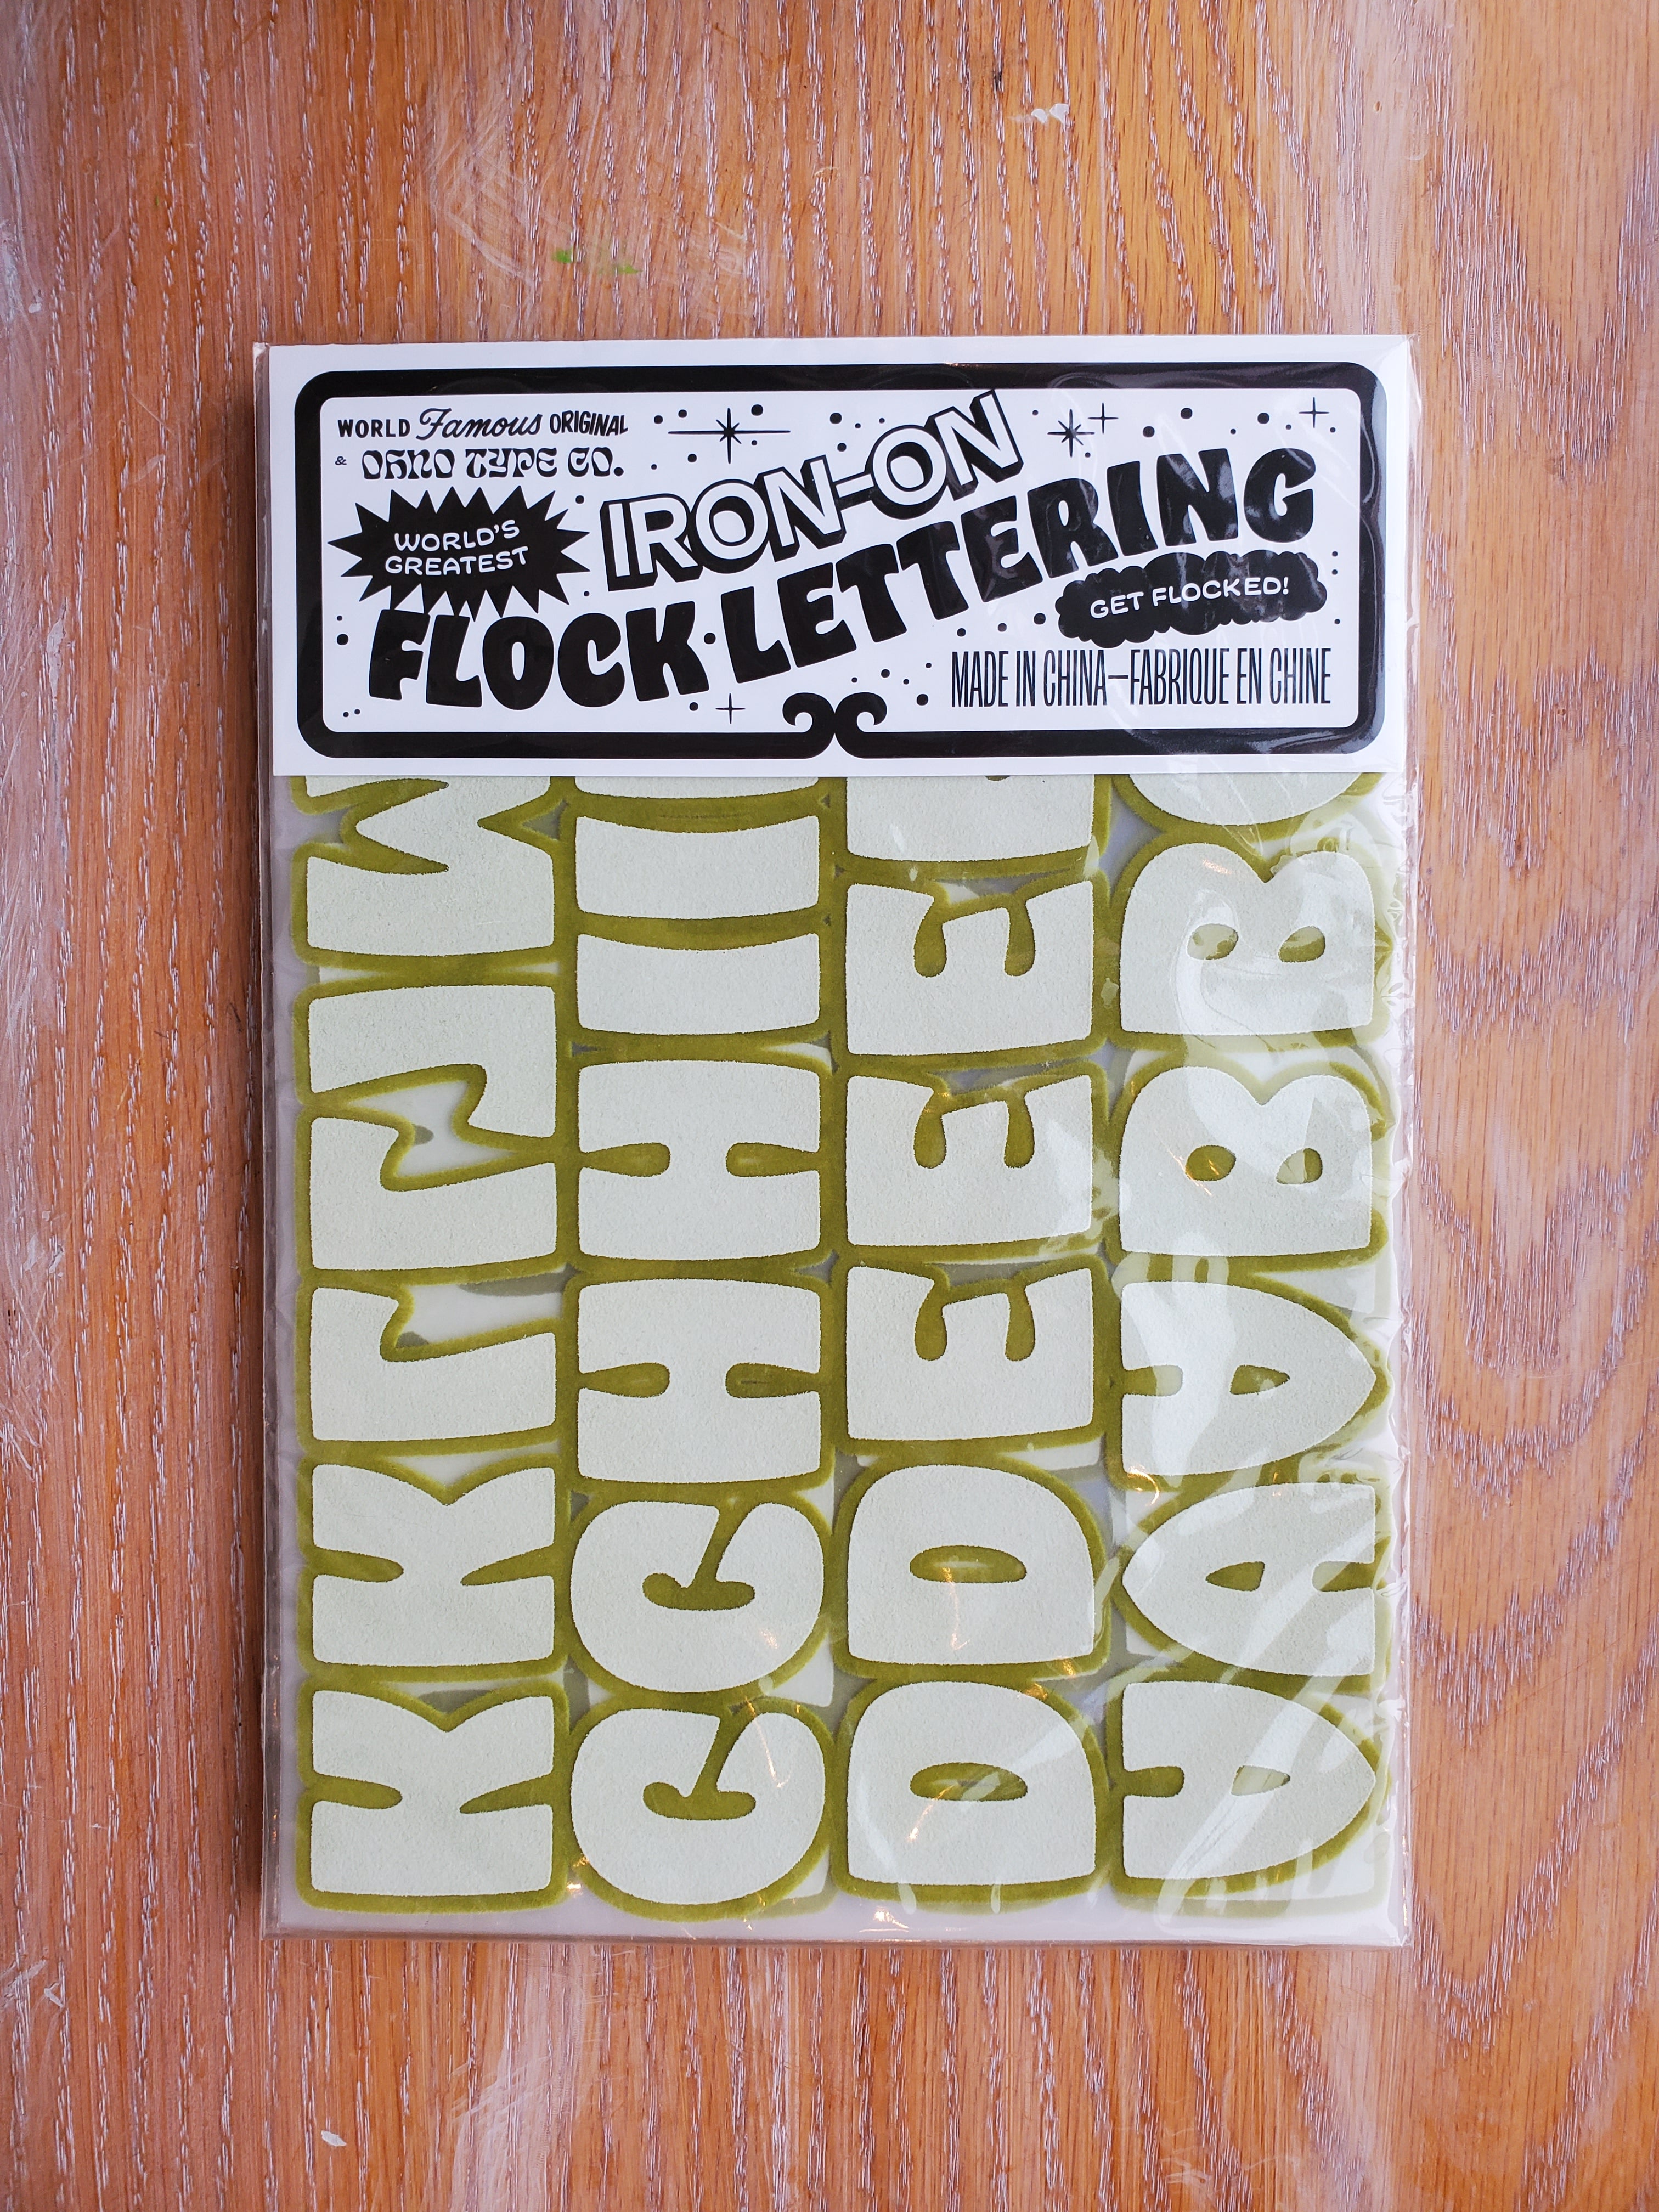 Iron-On Flocked Lettering by OHNO TYPE CO.